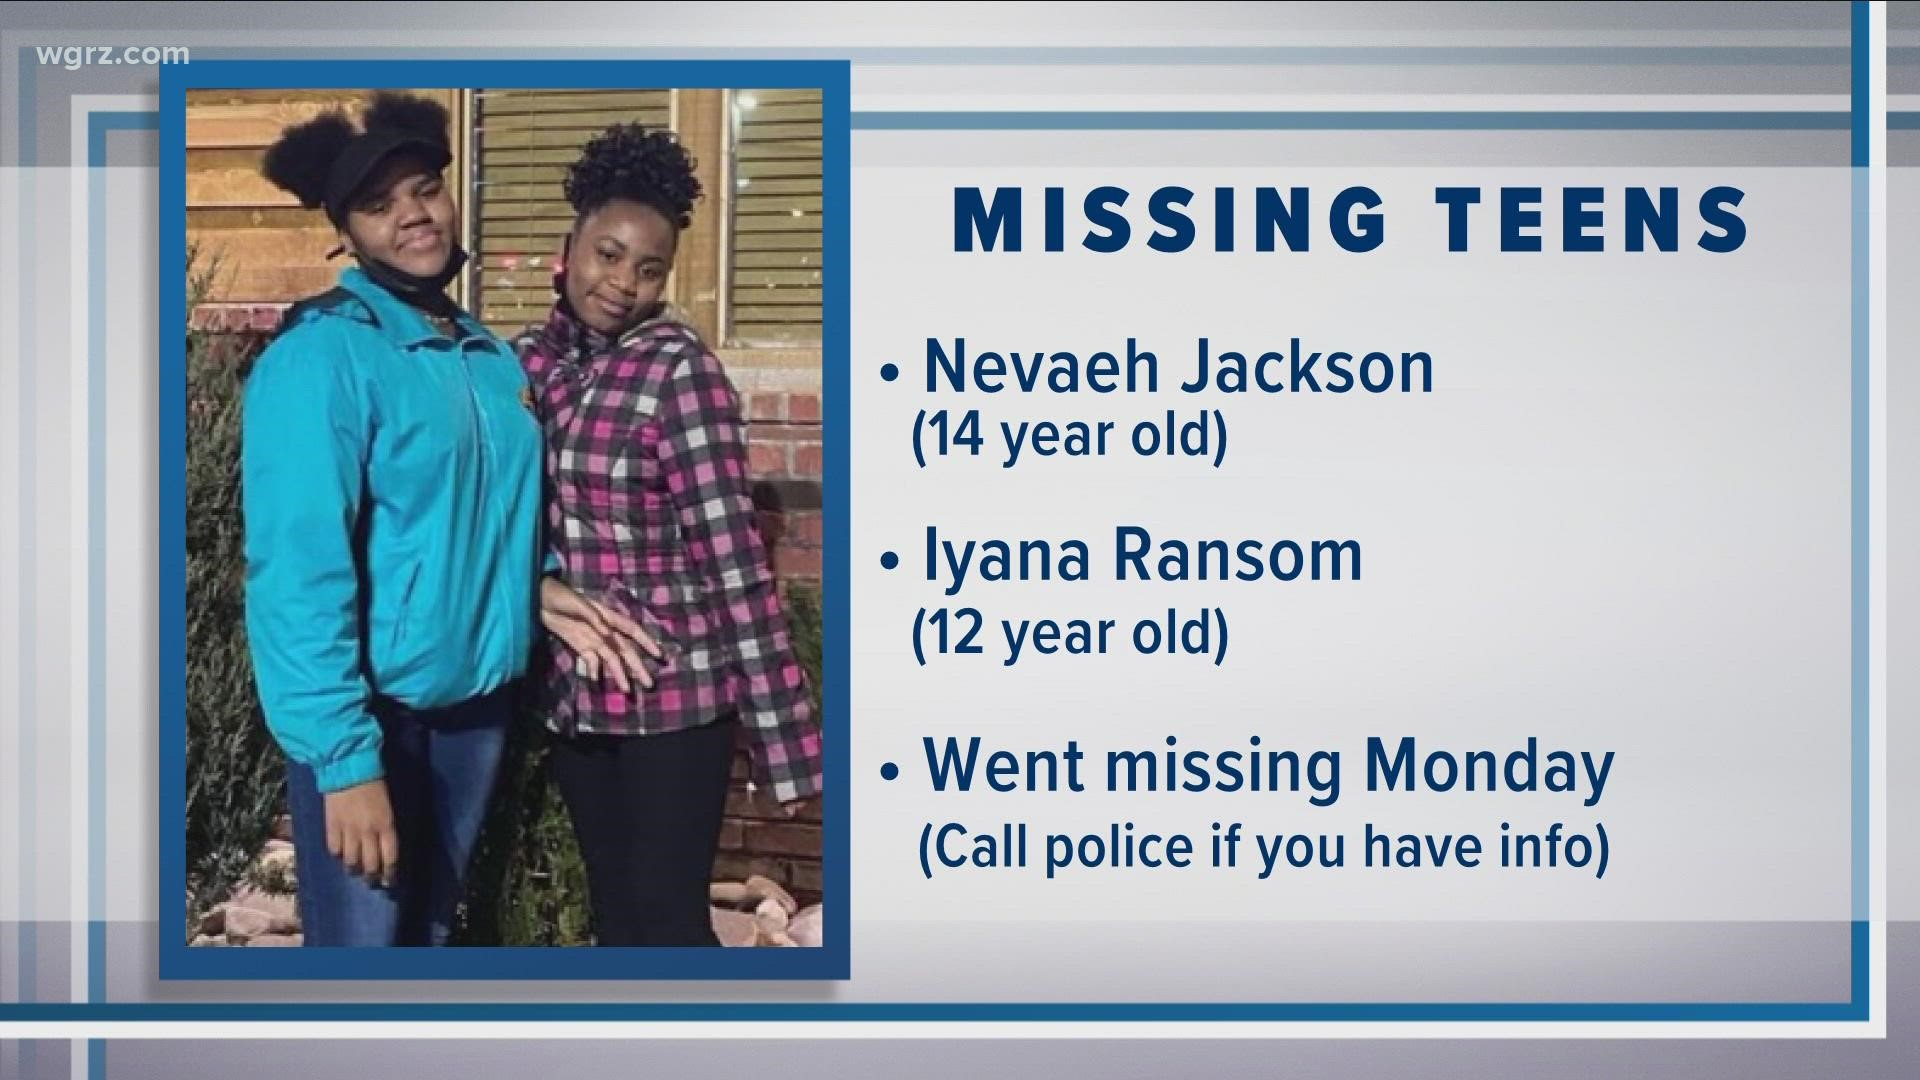 Buffalo police need your help finding two missing girls.